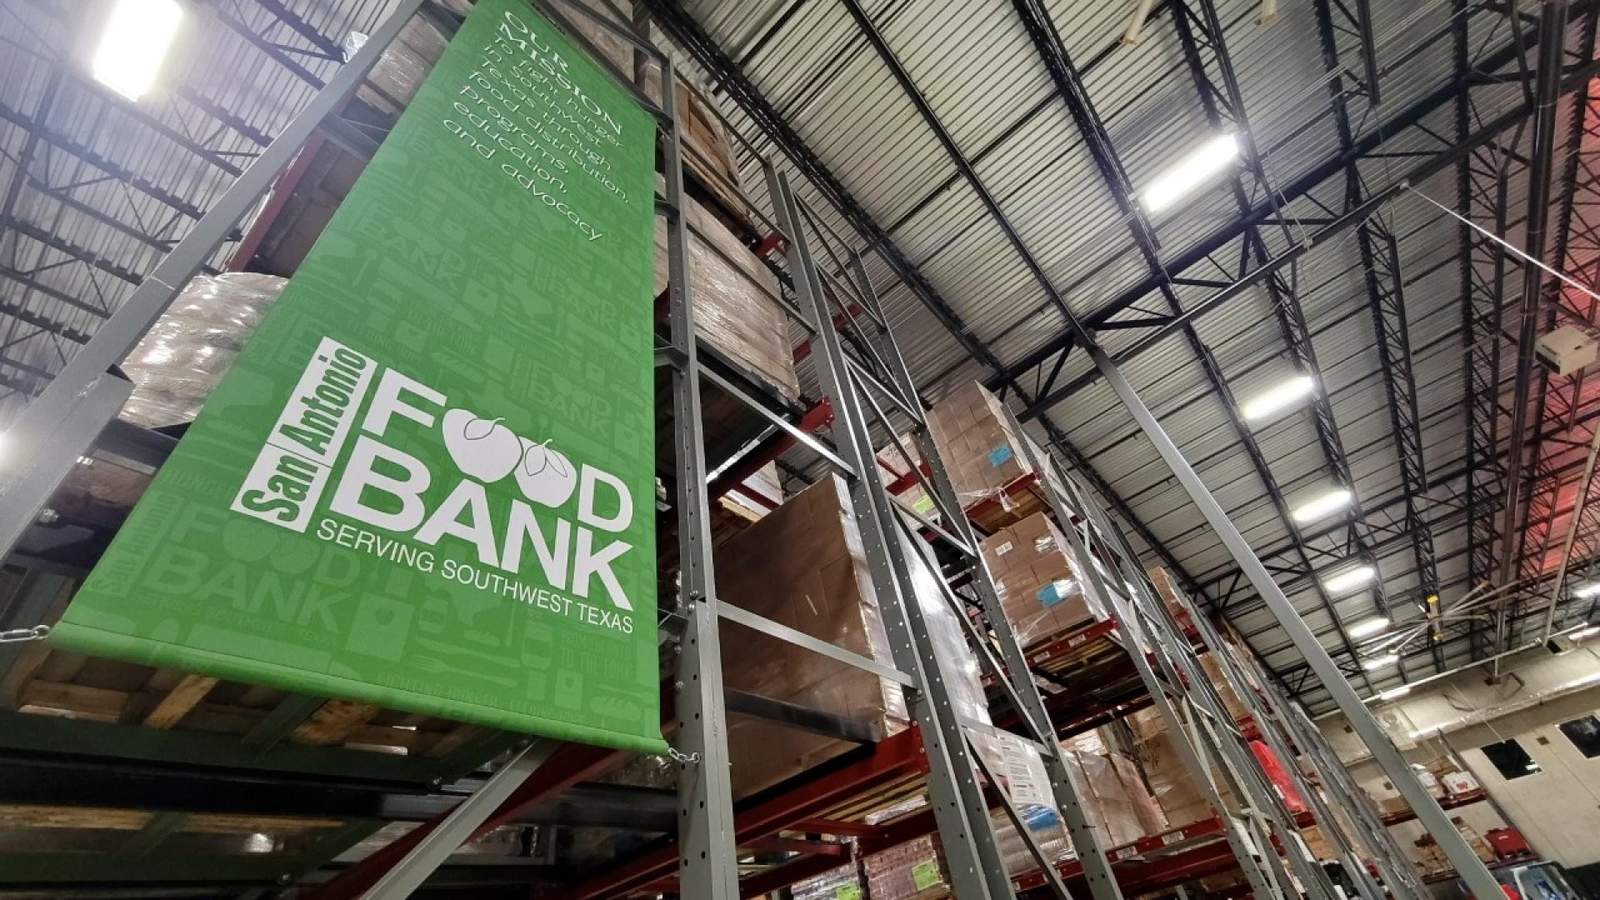 ‘If people need food, we’re going to have it for them’: San Antonio Food Bank to begin mega distribution in wake of historic winter storm